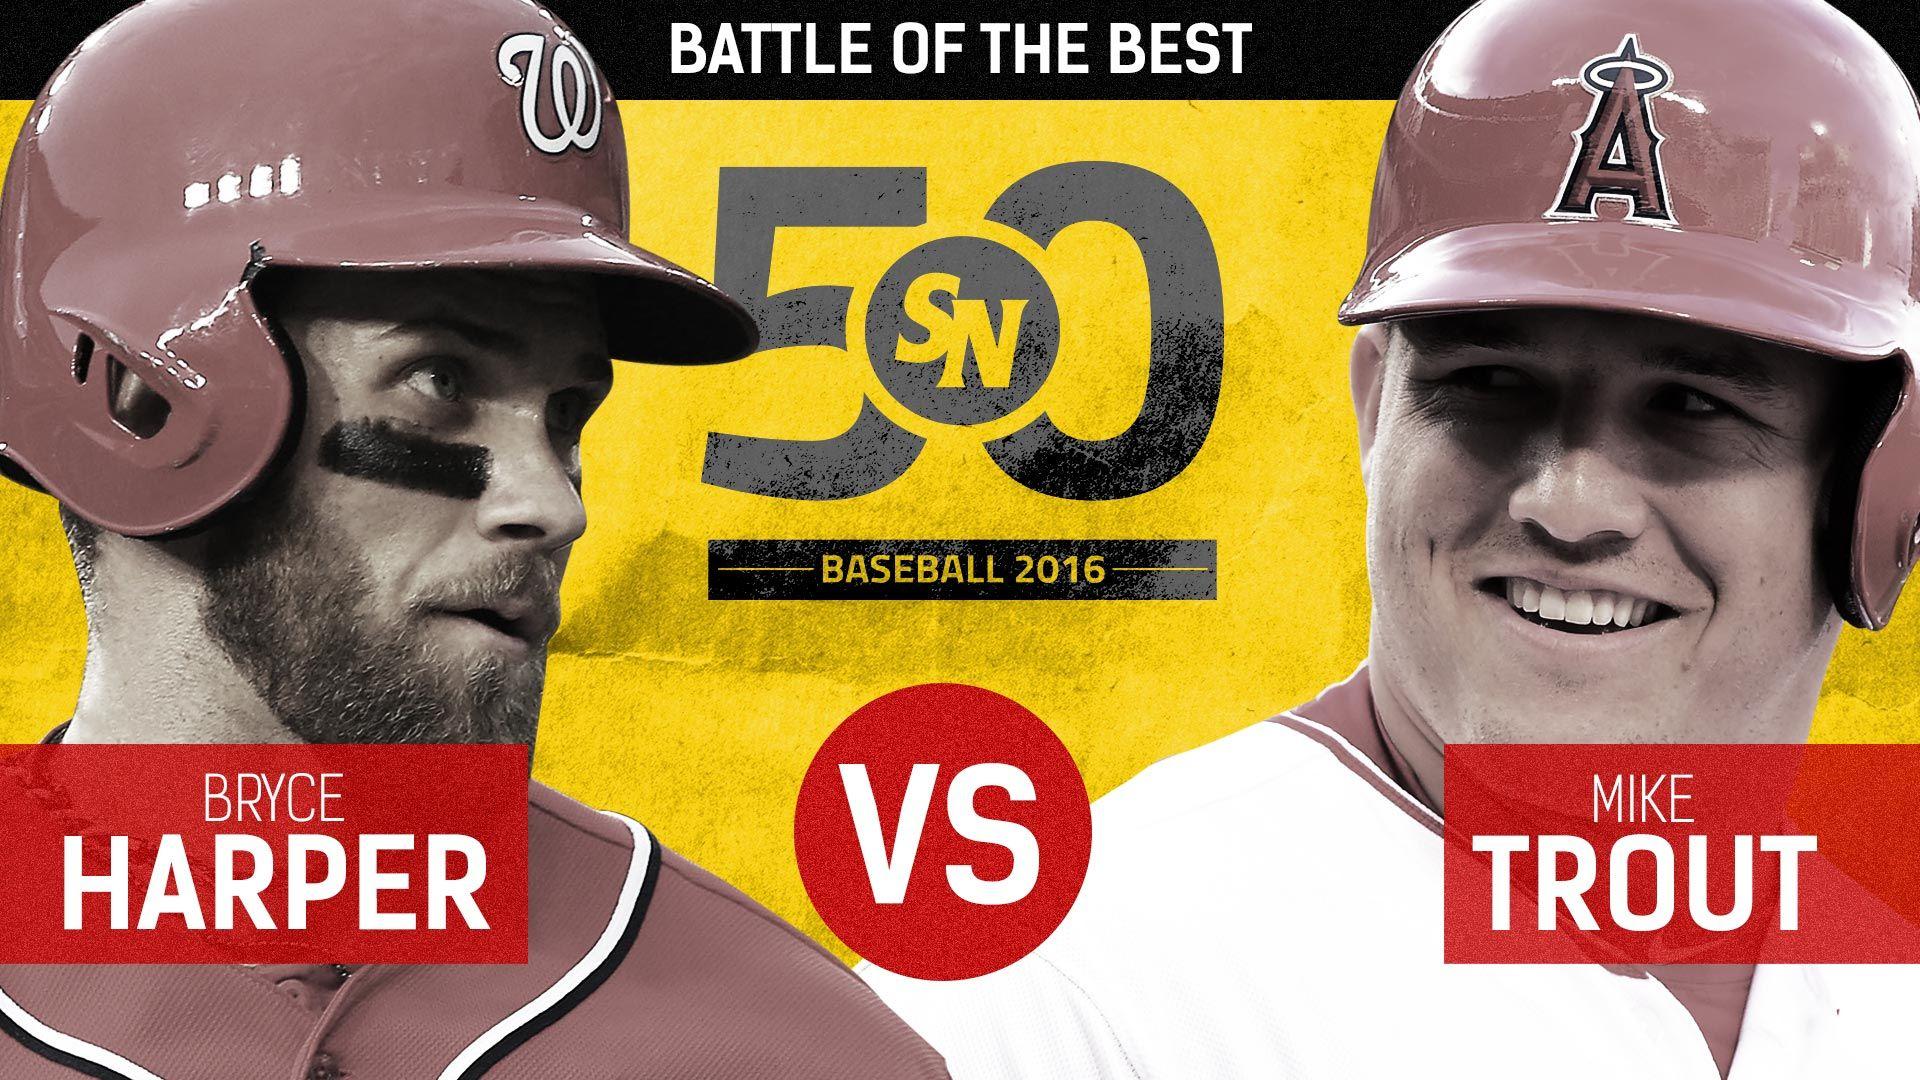 Mike Trout vs. Bryce Harper: The SN50 rivalry that defines this